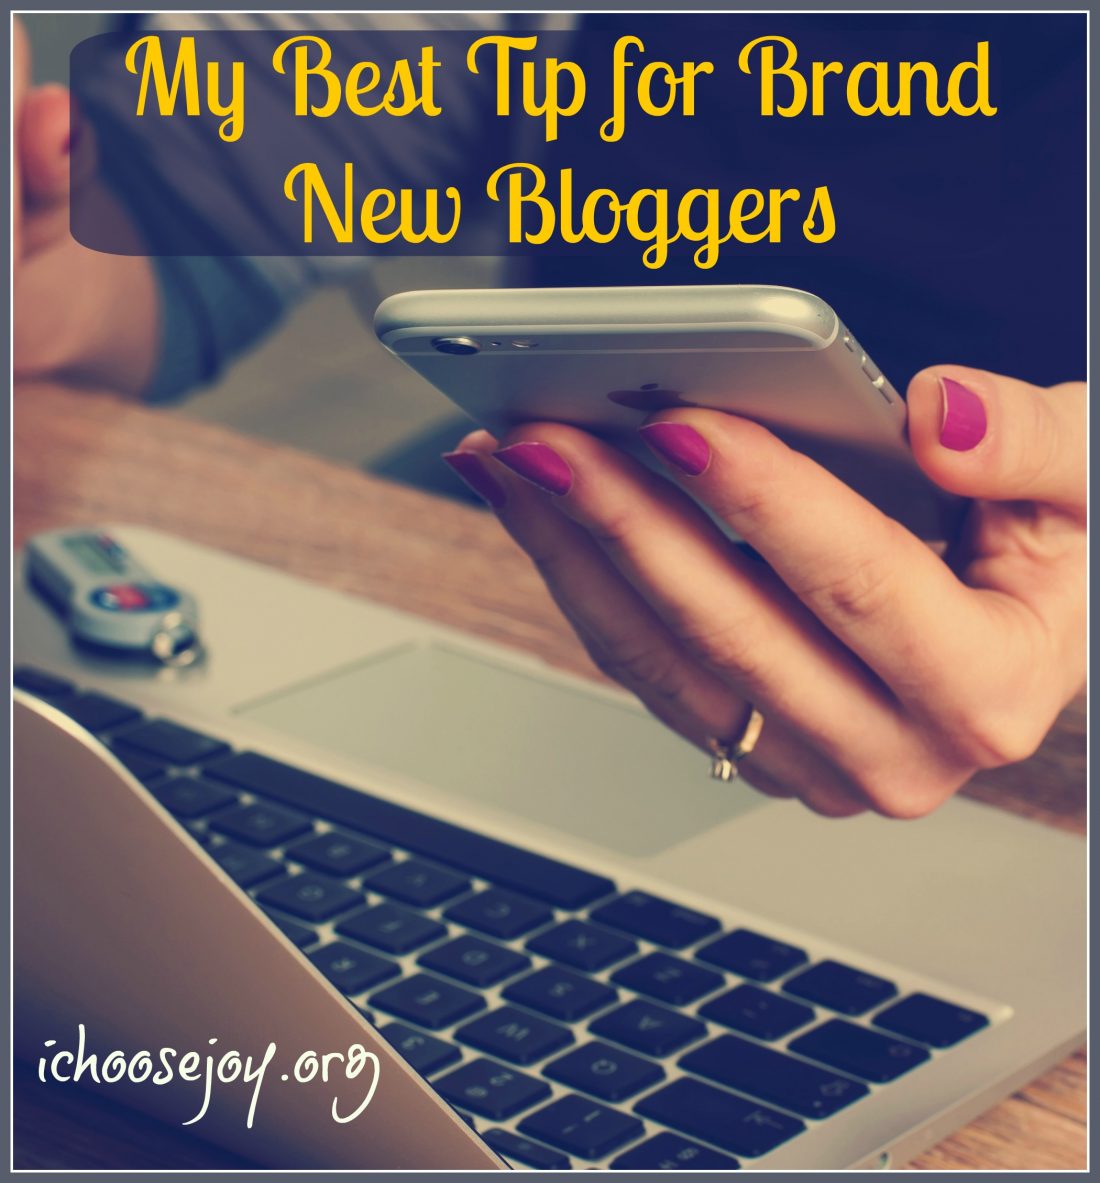 My Best Tip for Brand New Bloggers